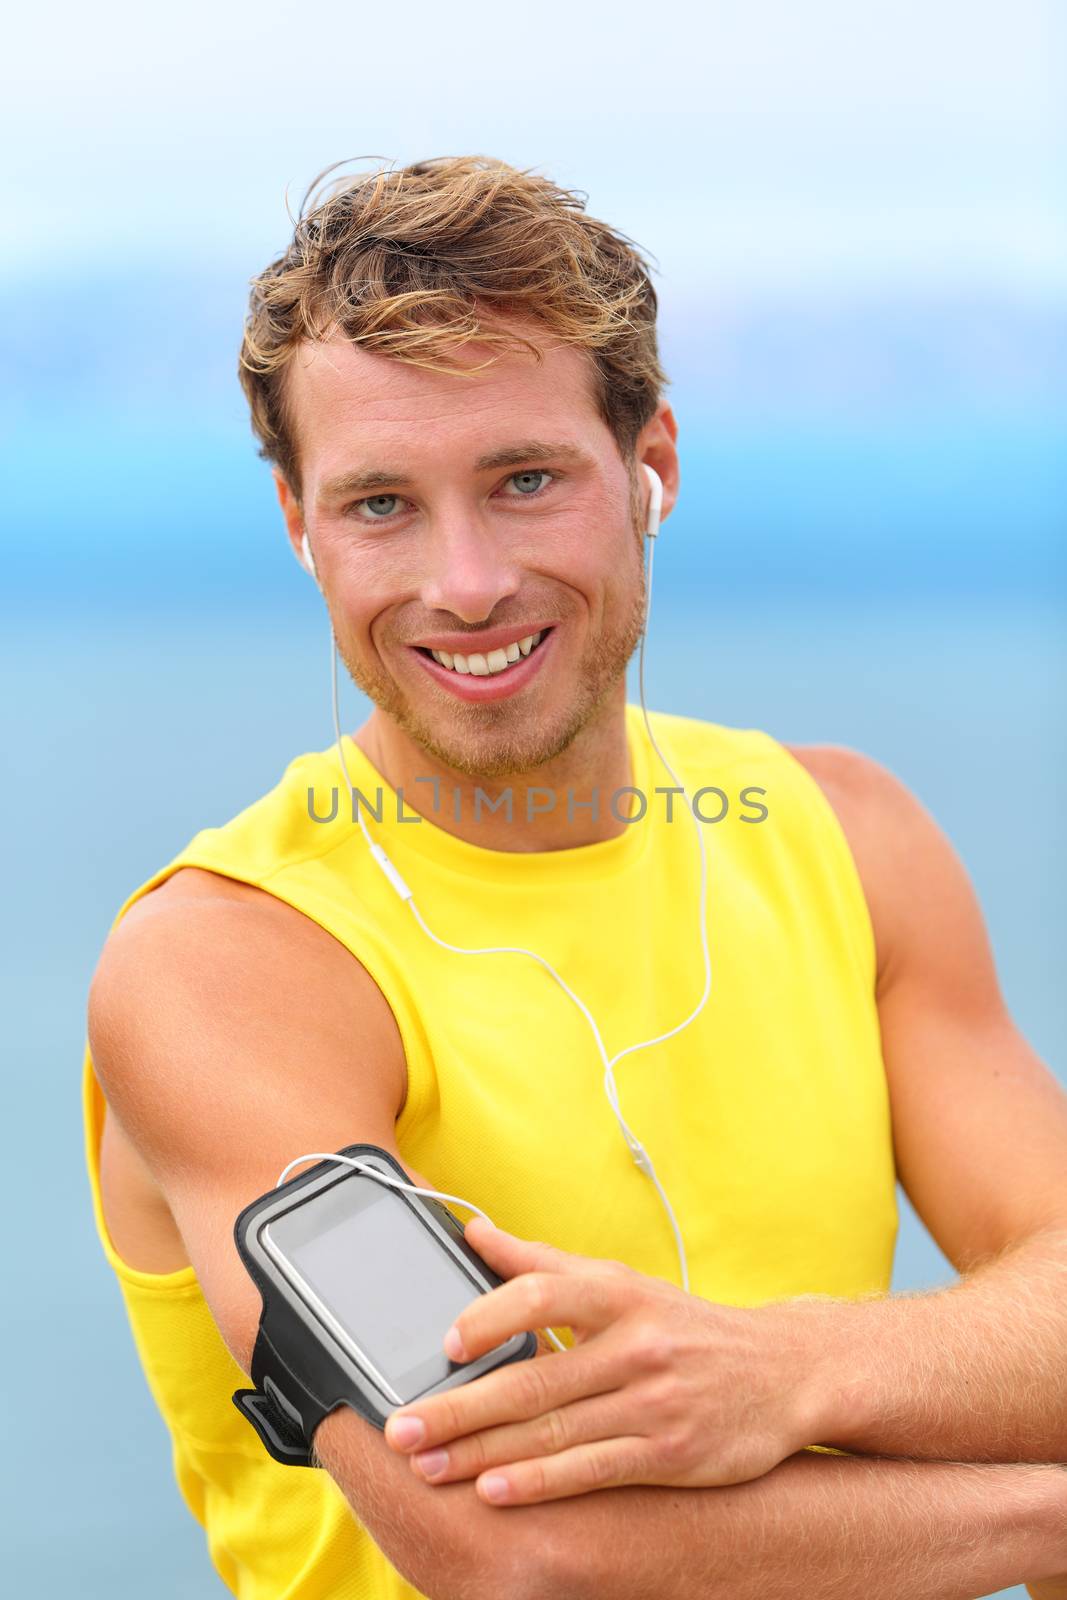 Running app on smartphone. Male runner listening to music adjusting settings on armband for smart phone. Fit man fitness model working outdoor by water.